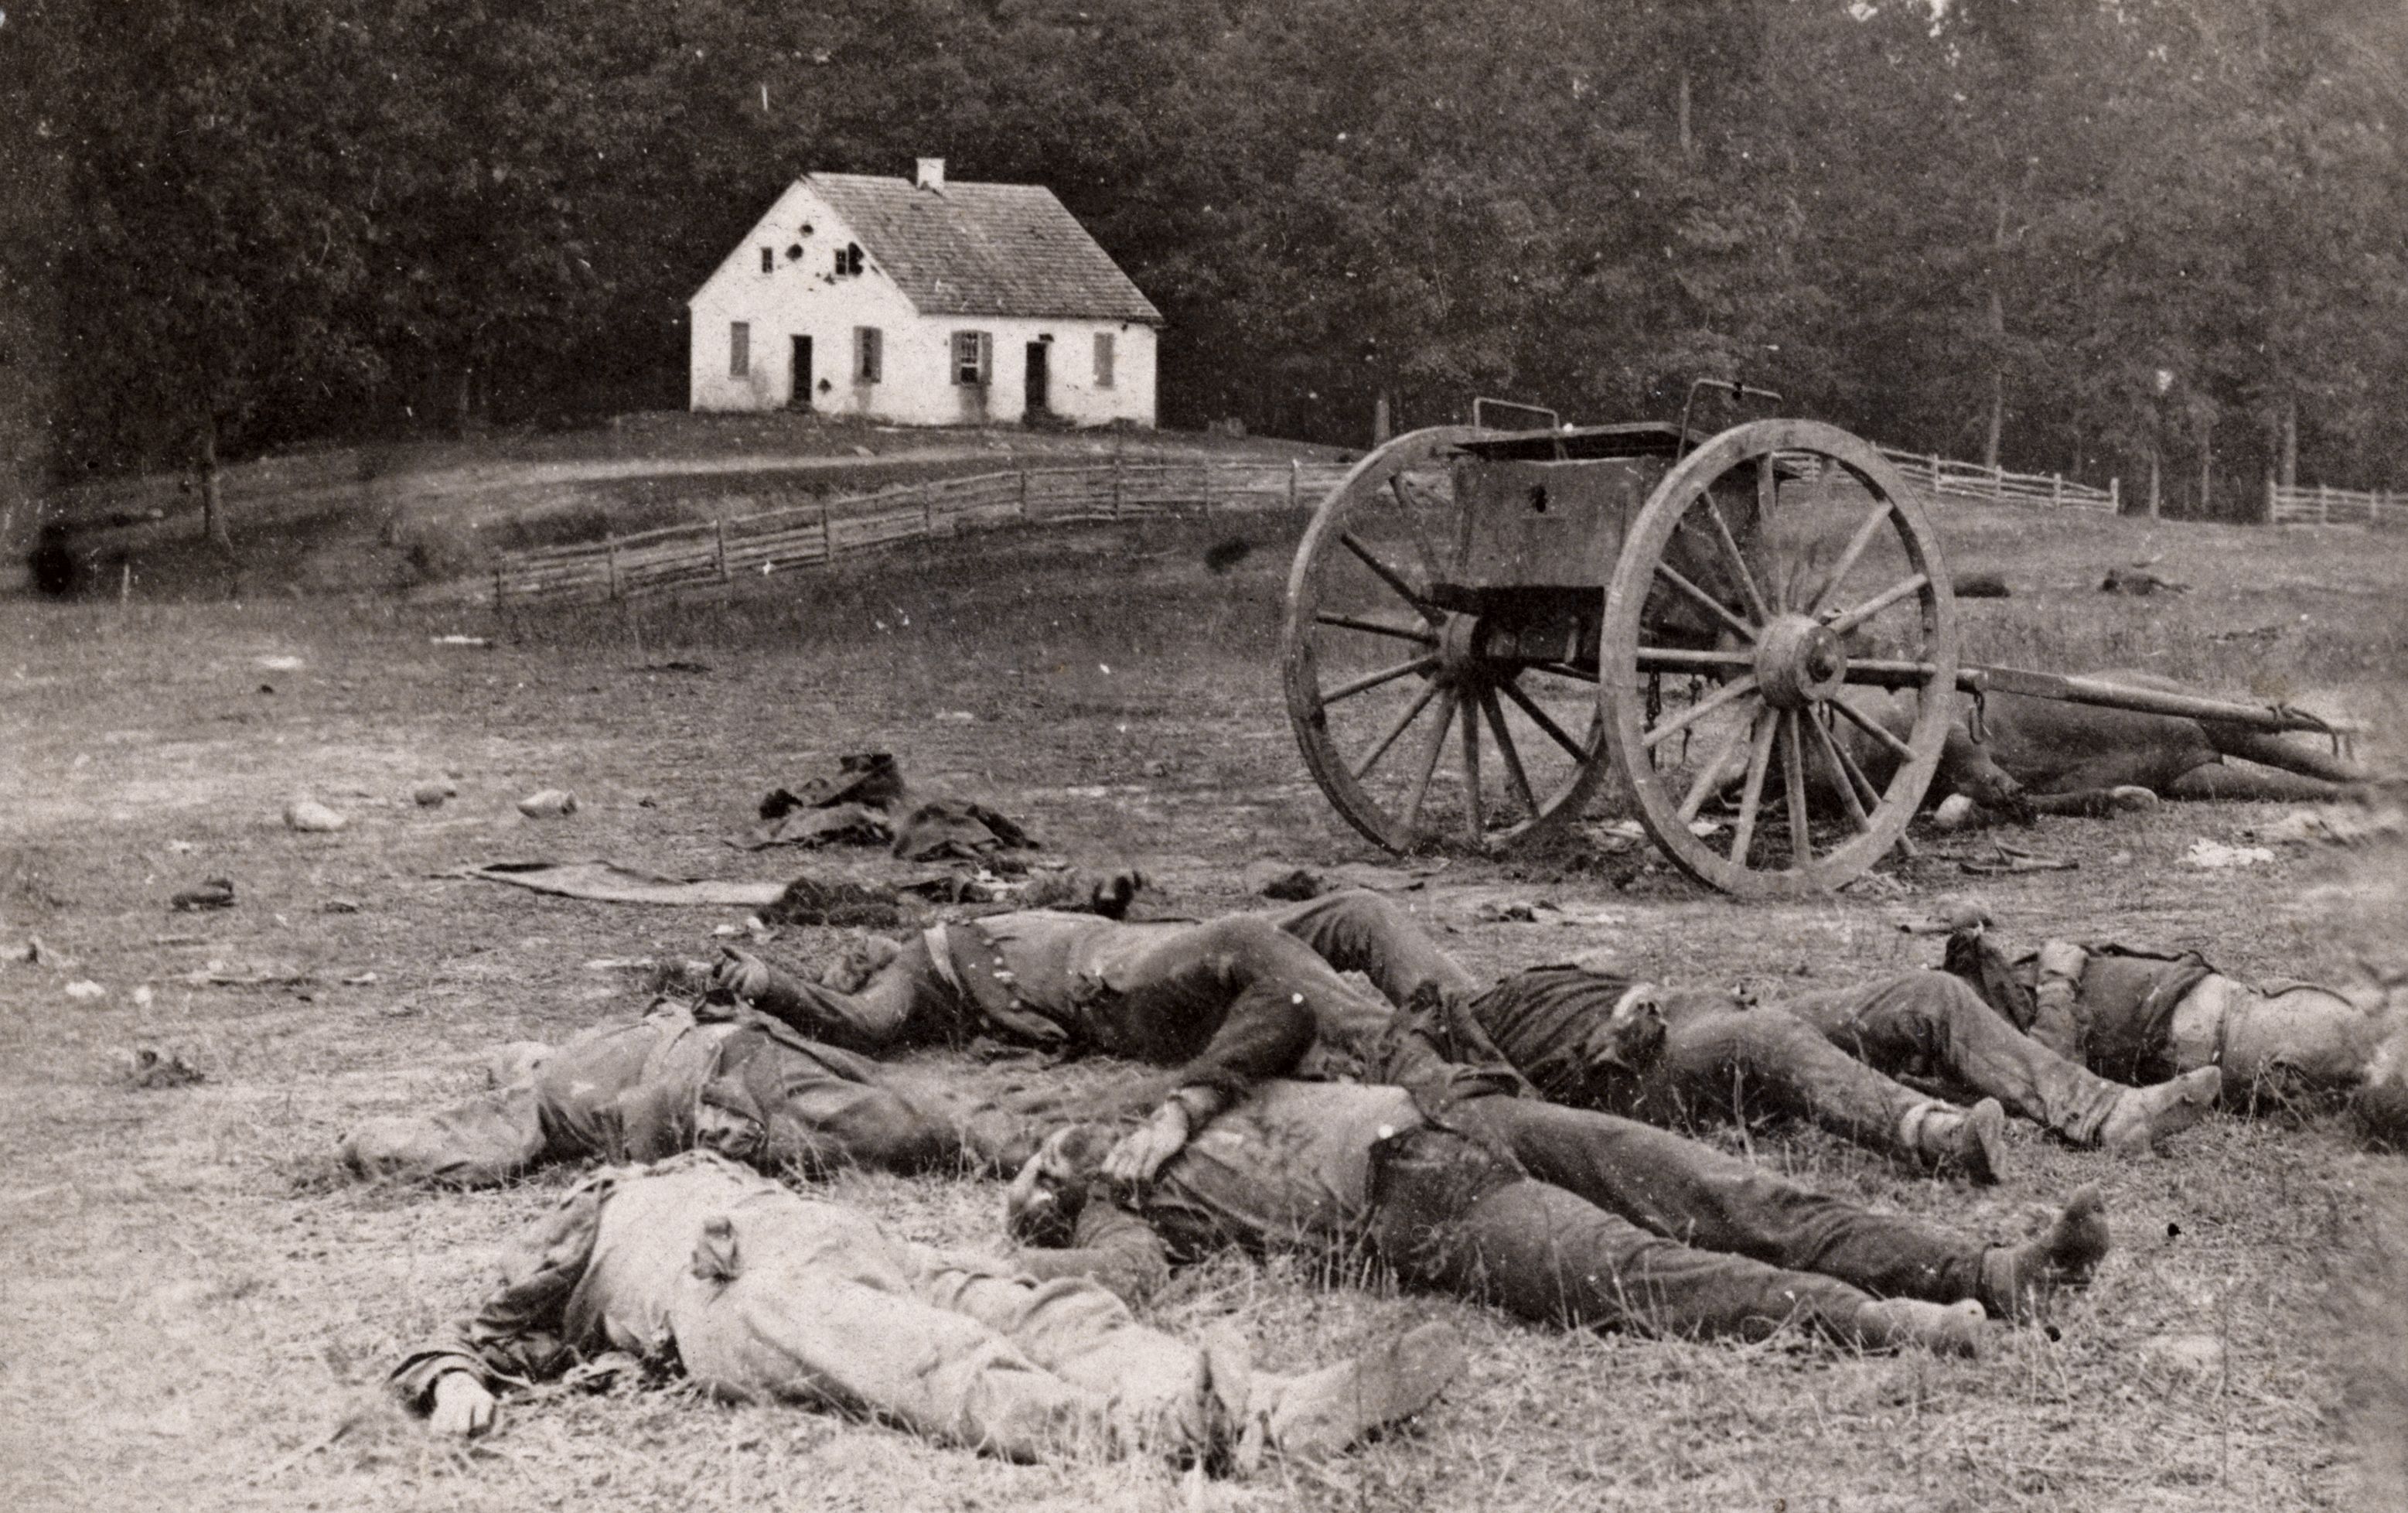 Alexander Gardner's photographs of the dead at Antietam would stun the North.